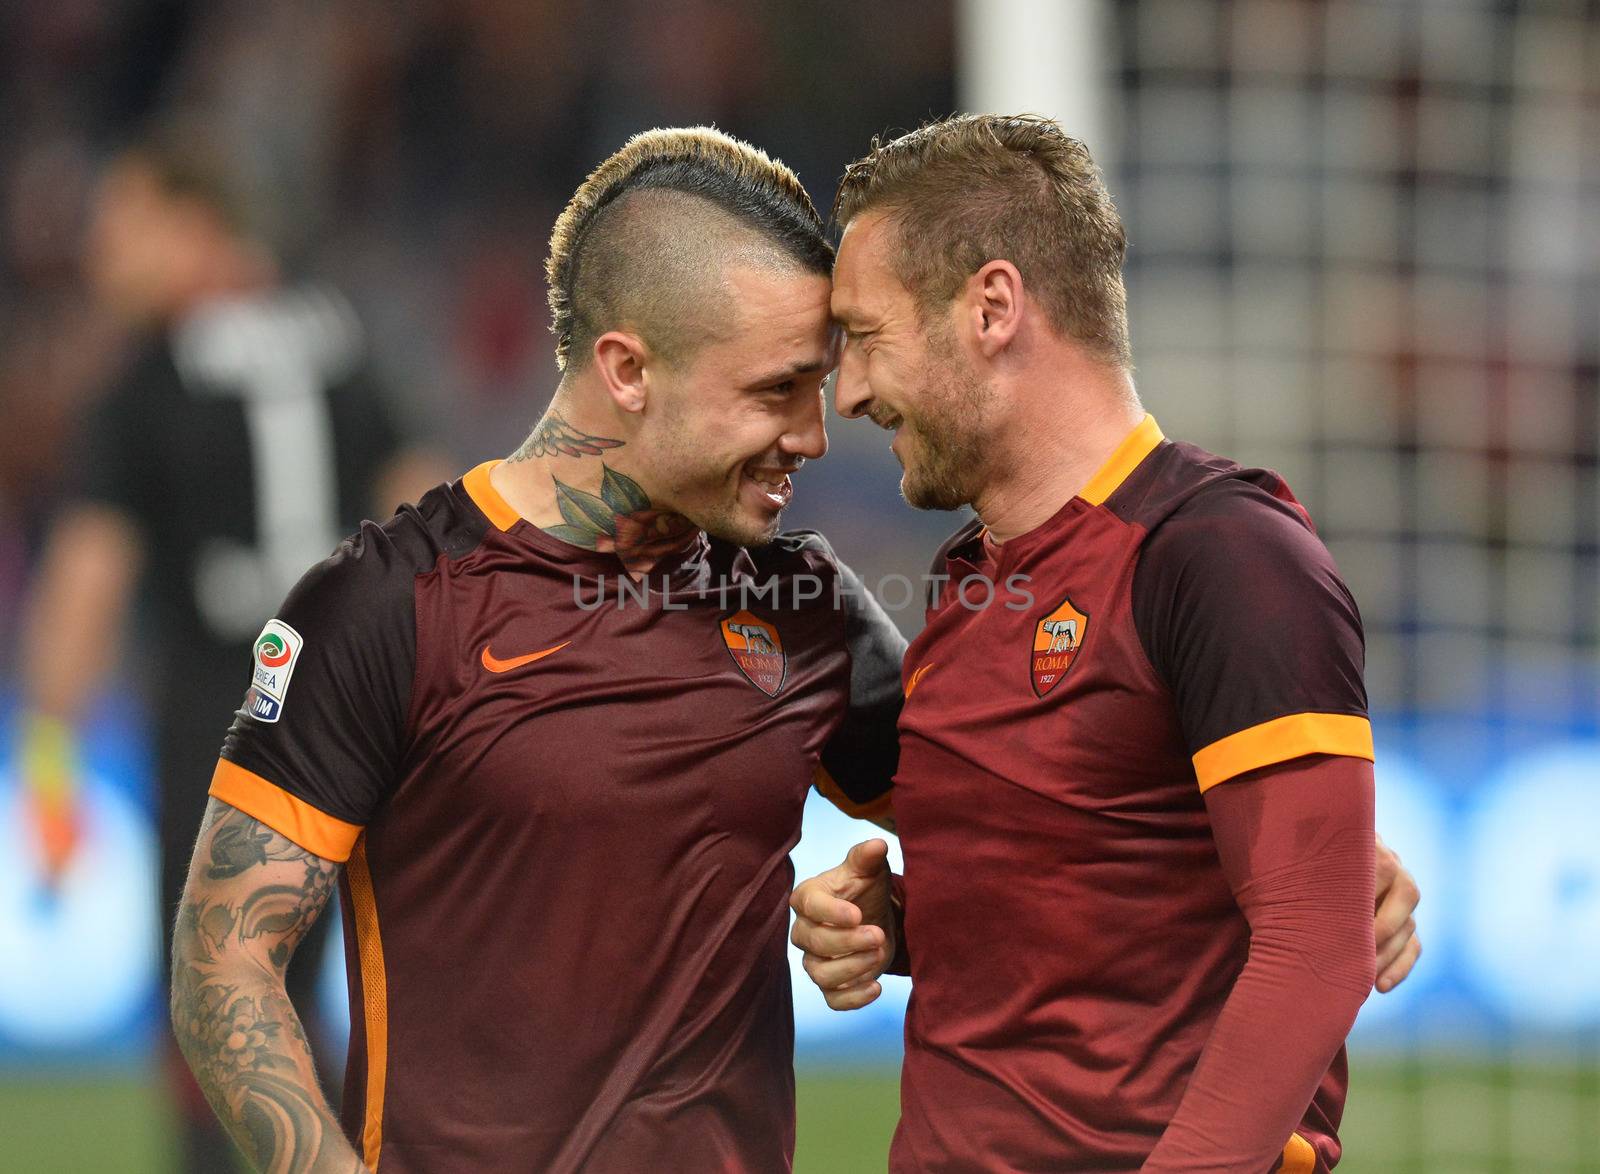 ITALY, Rome: Francesco Totti and Radja Nianggolan of AS Roma celebrate after scoring the team's third goal from penalty spot during the Serie A match between AS Roma and Torino FC at Stadio Olimpico on April 20, 2016 in Rome, Italy. 